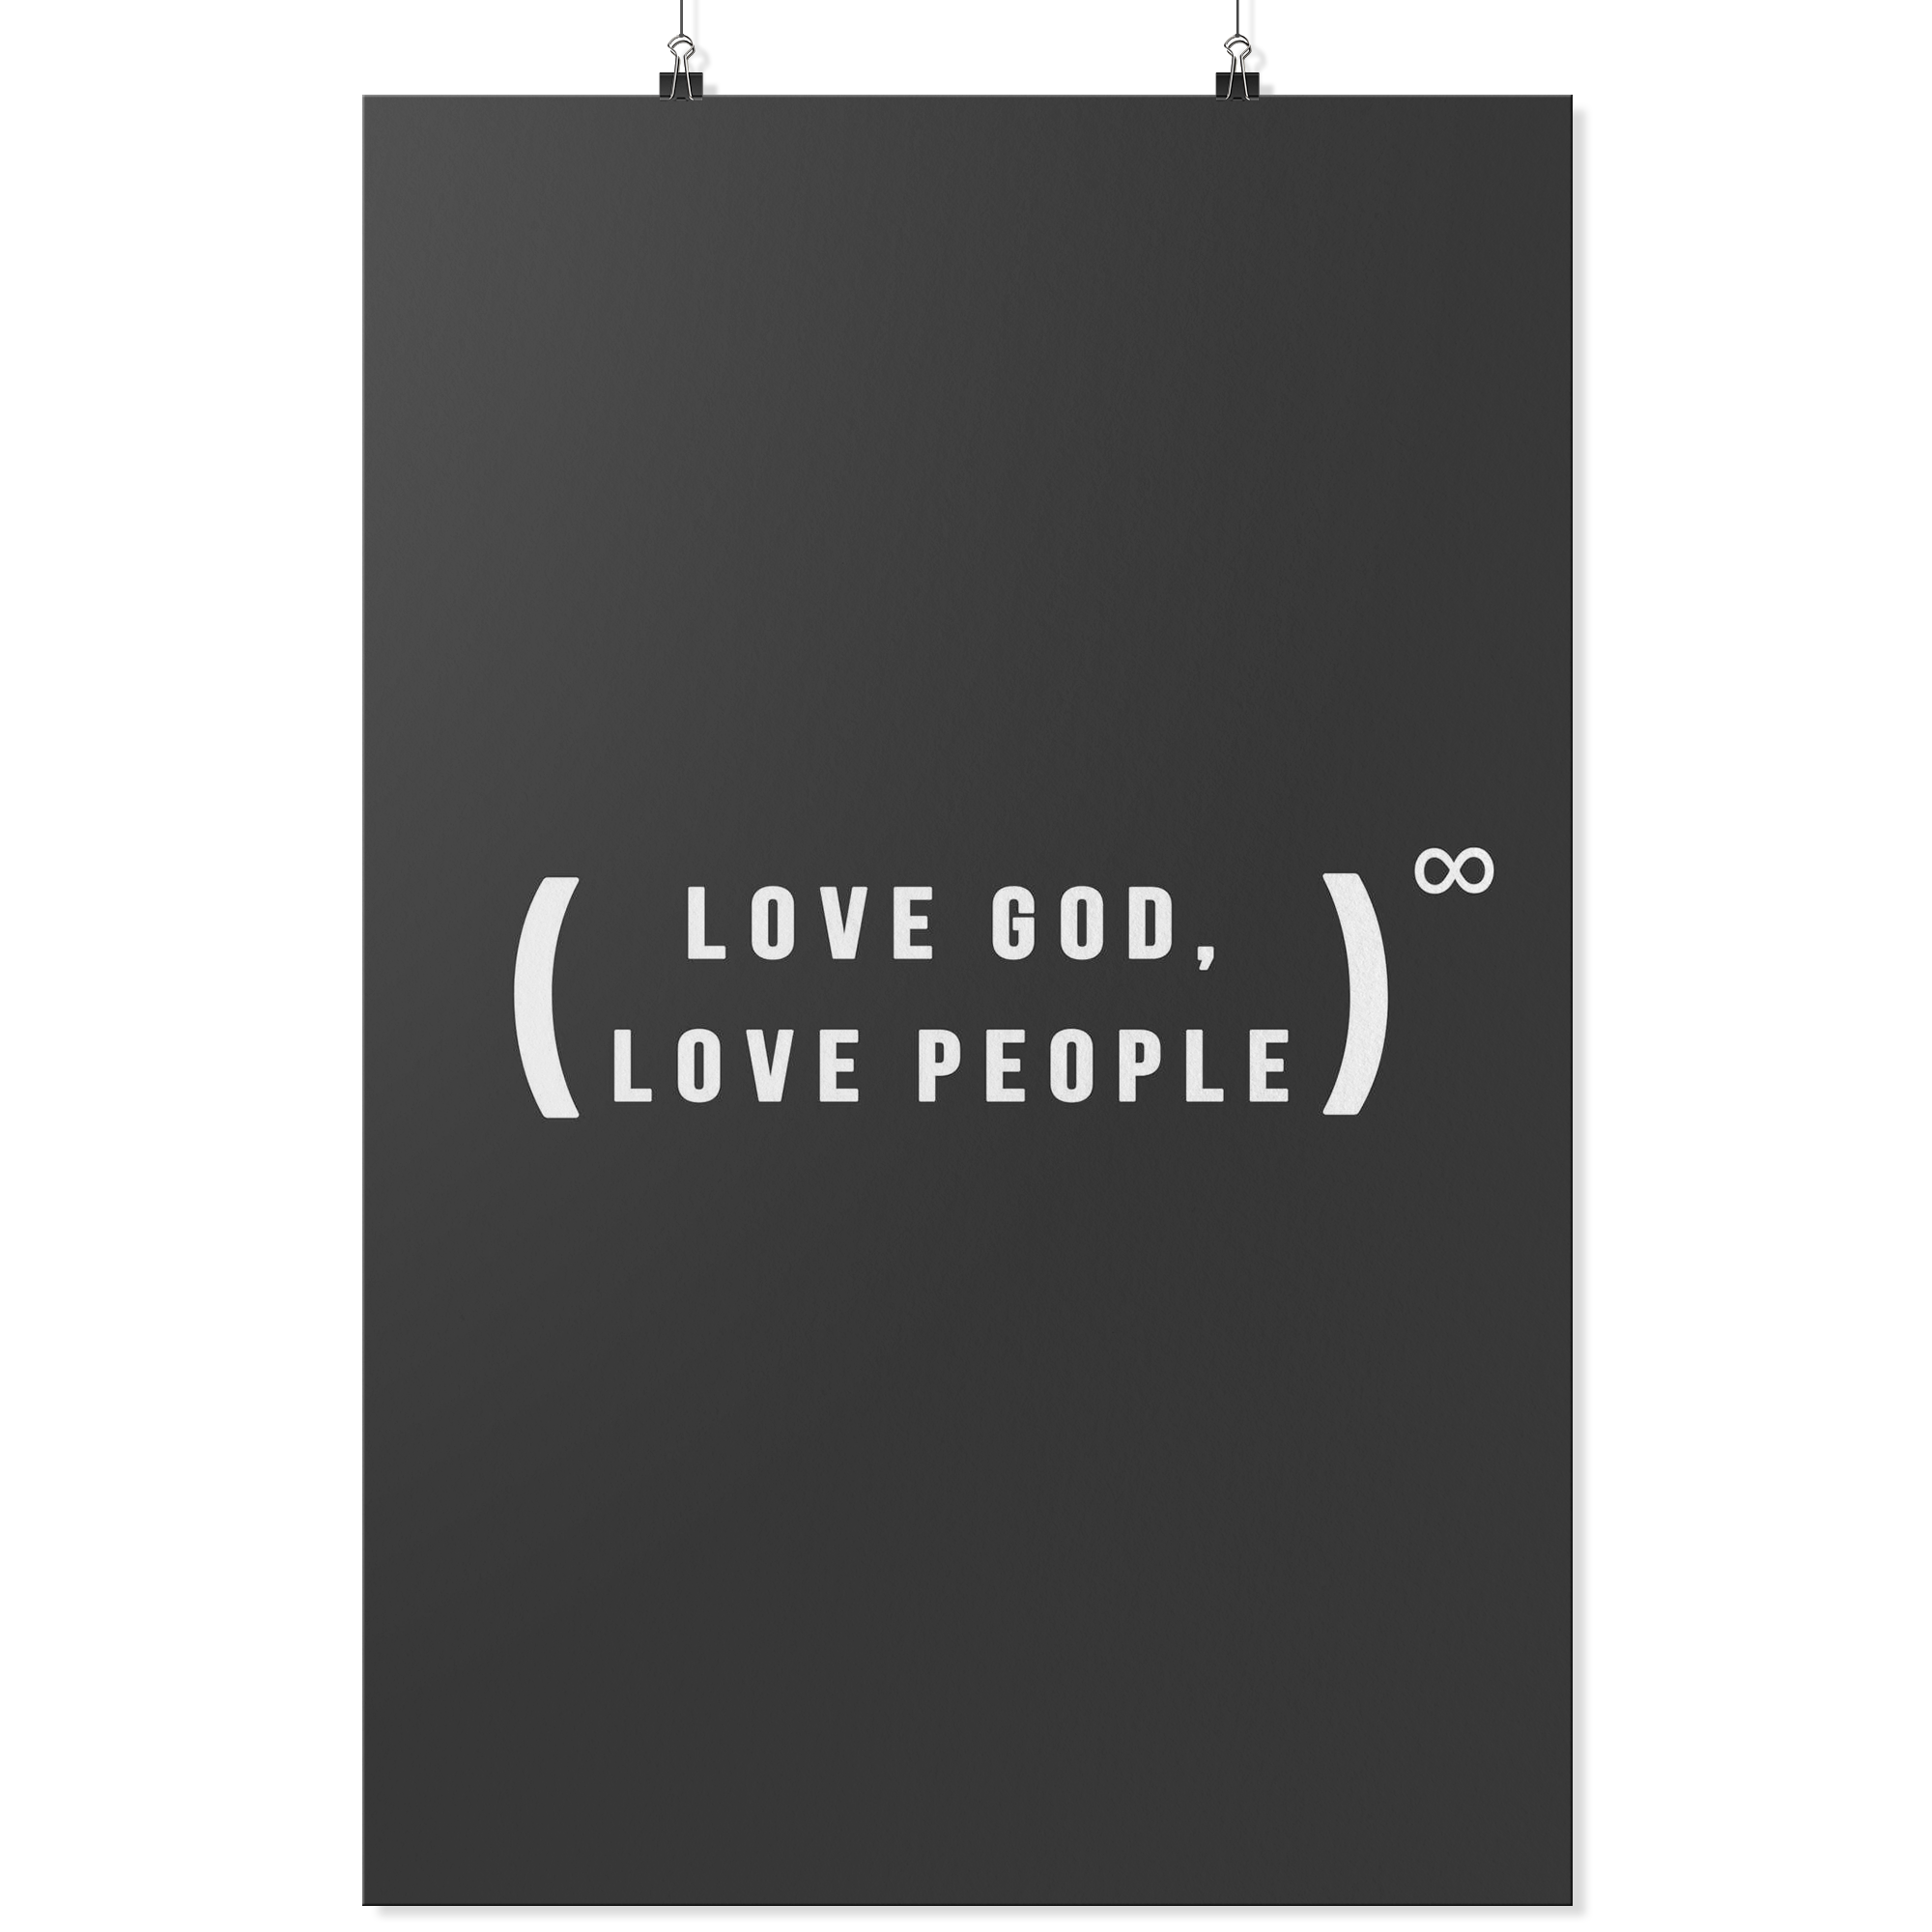 Love God, Love People (Wall Poster)